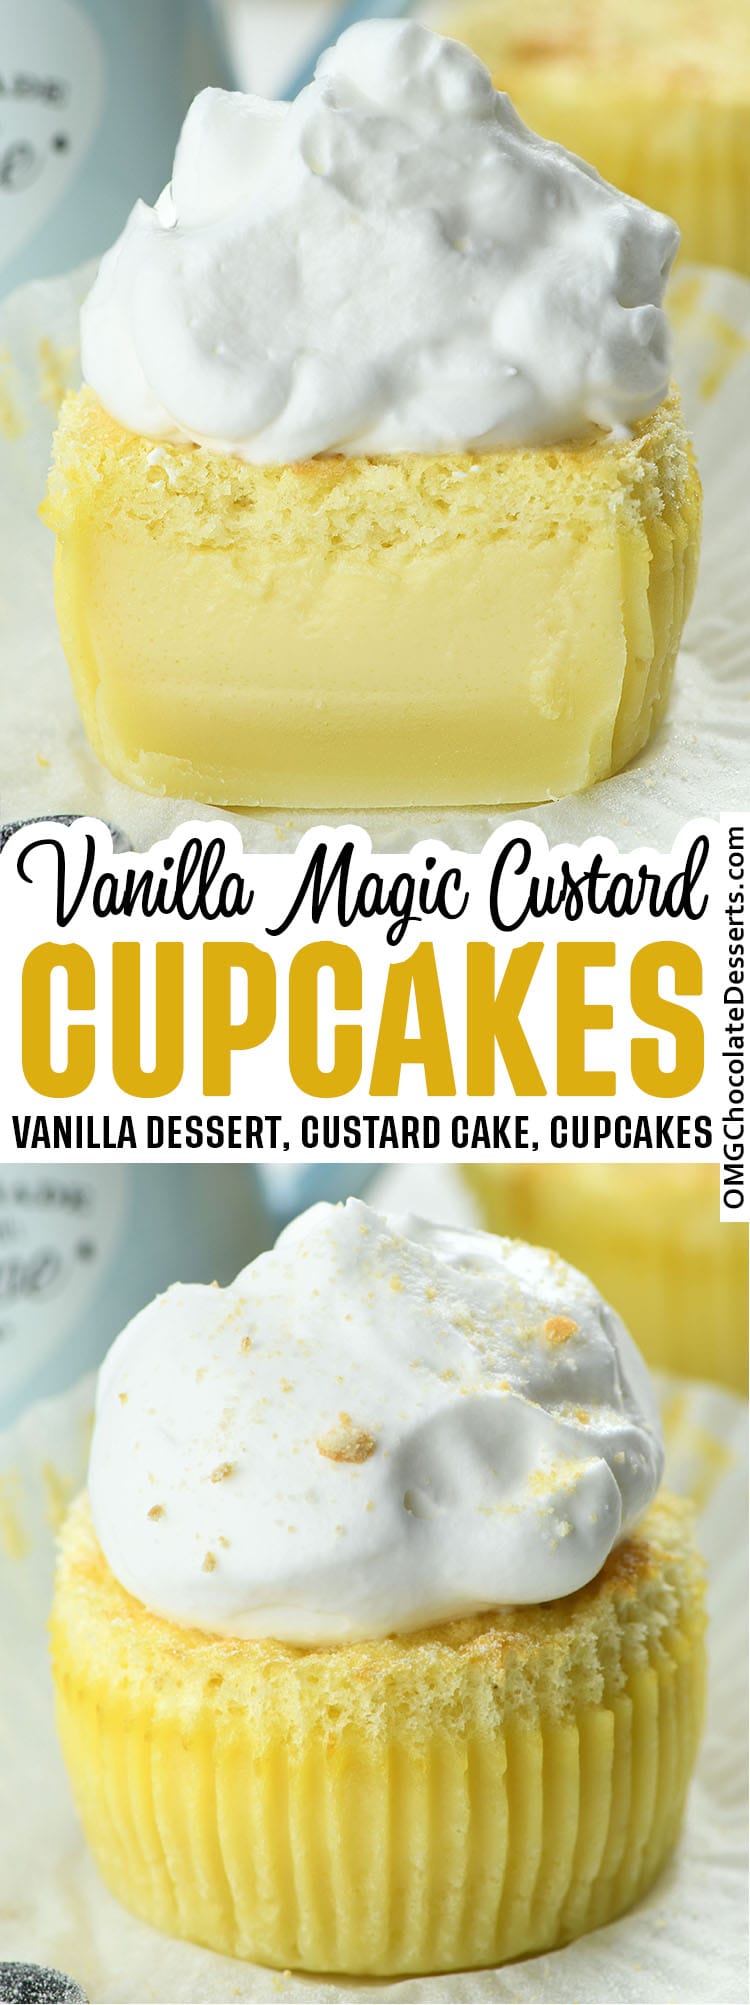 Two different images of Vanilla Magic Custard Cupcakes with title between them.